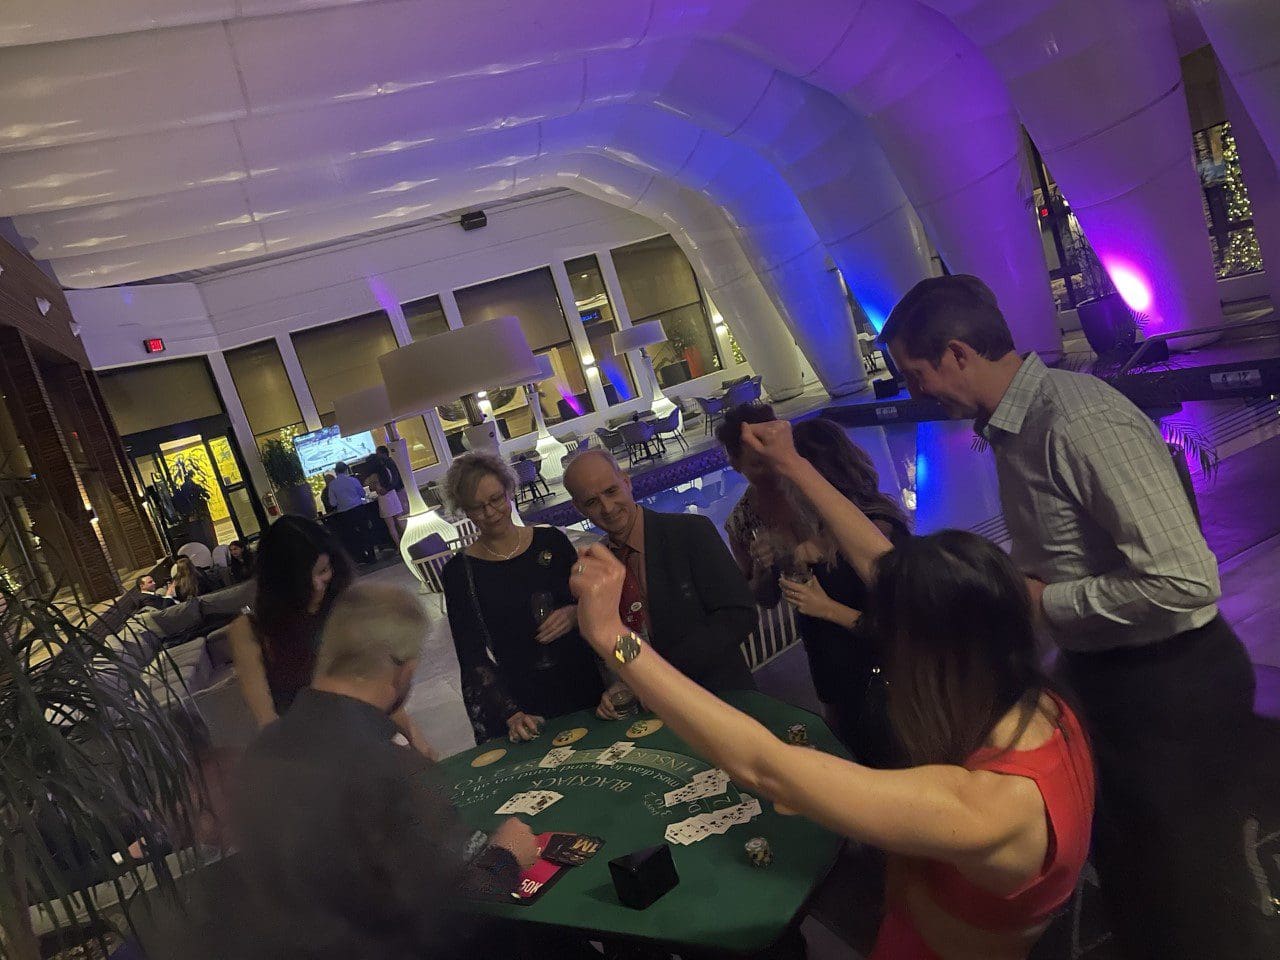 A group of people playing cards at an event.